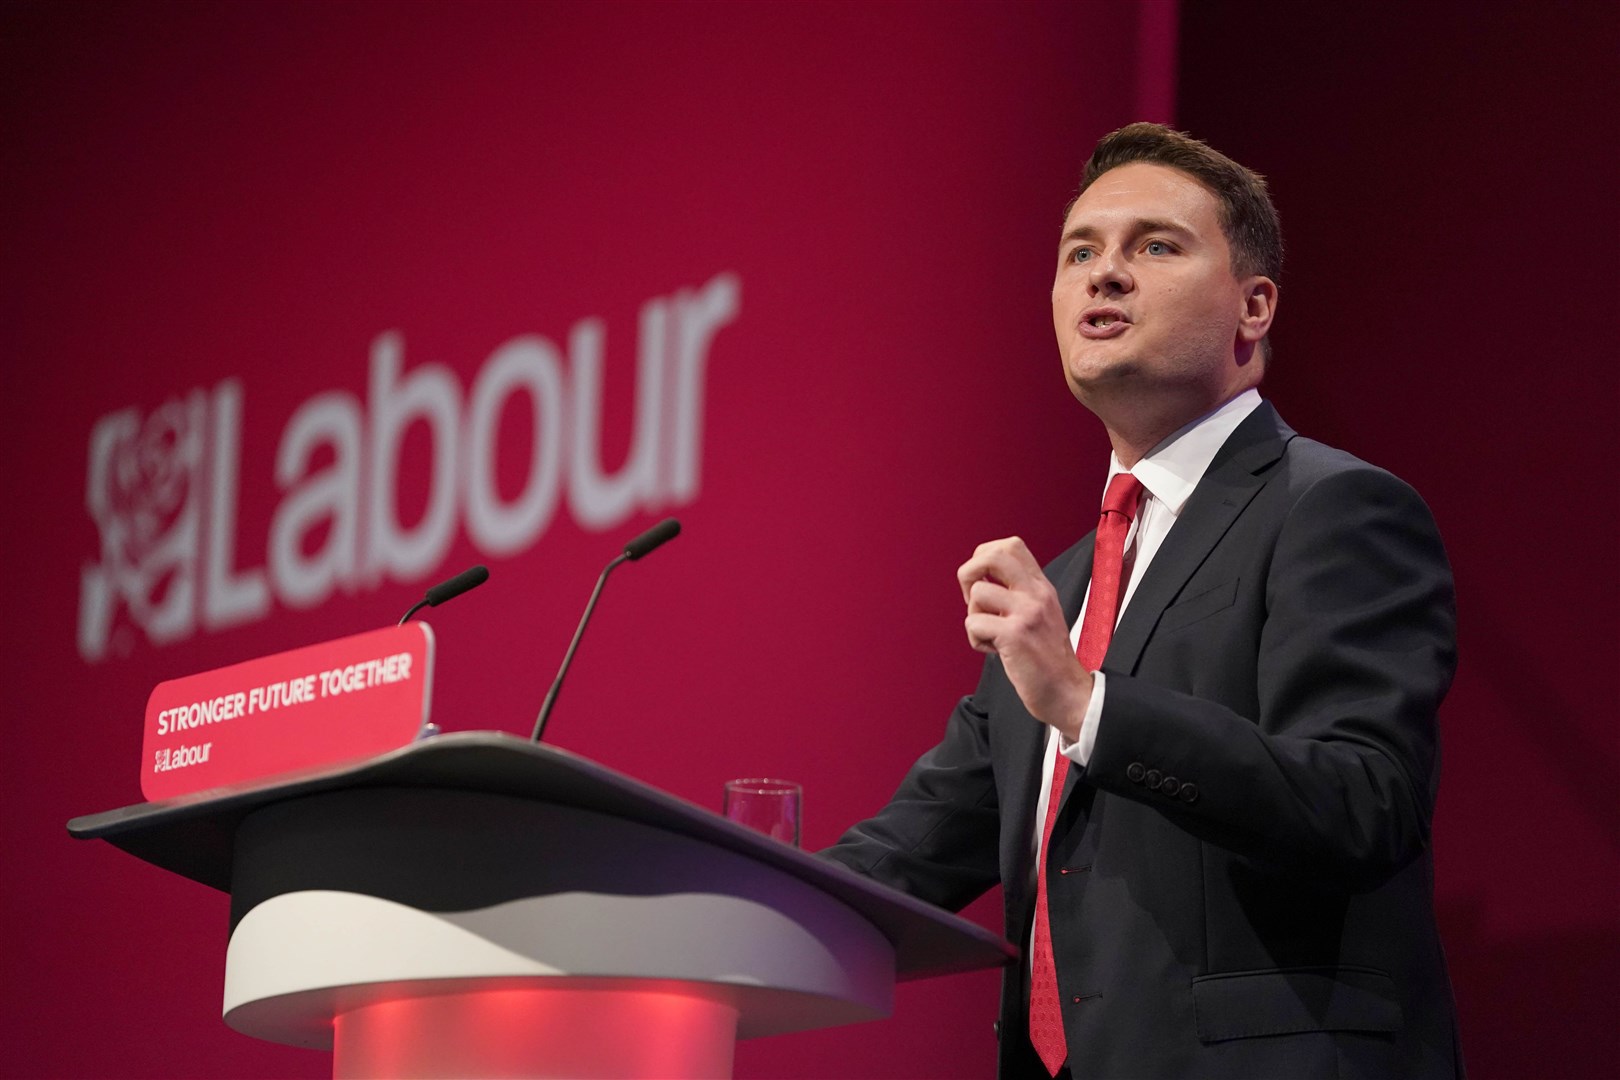 Labour’s Wes Streeting called for VAT to be cut on domestic energy bills for six months (Gareth Fuller/PA)